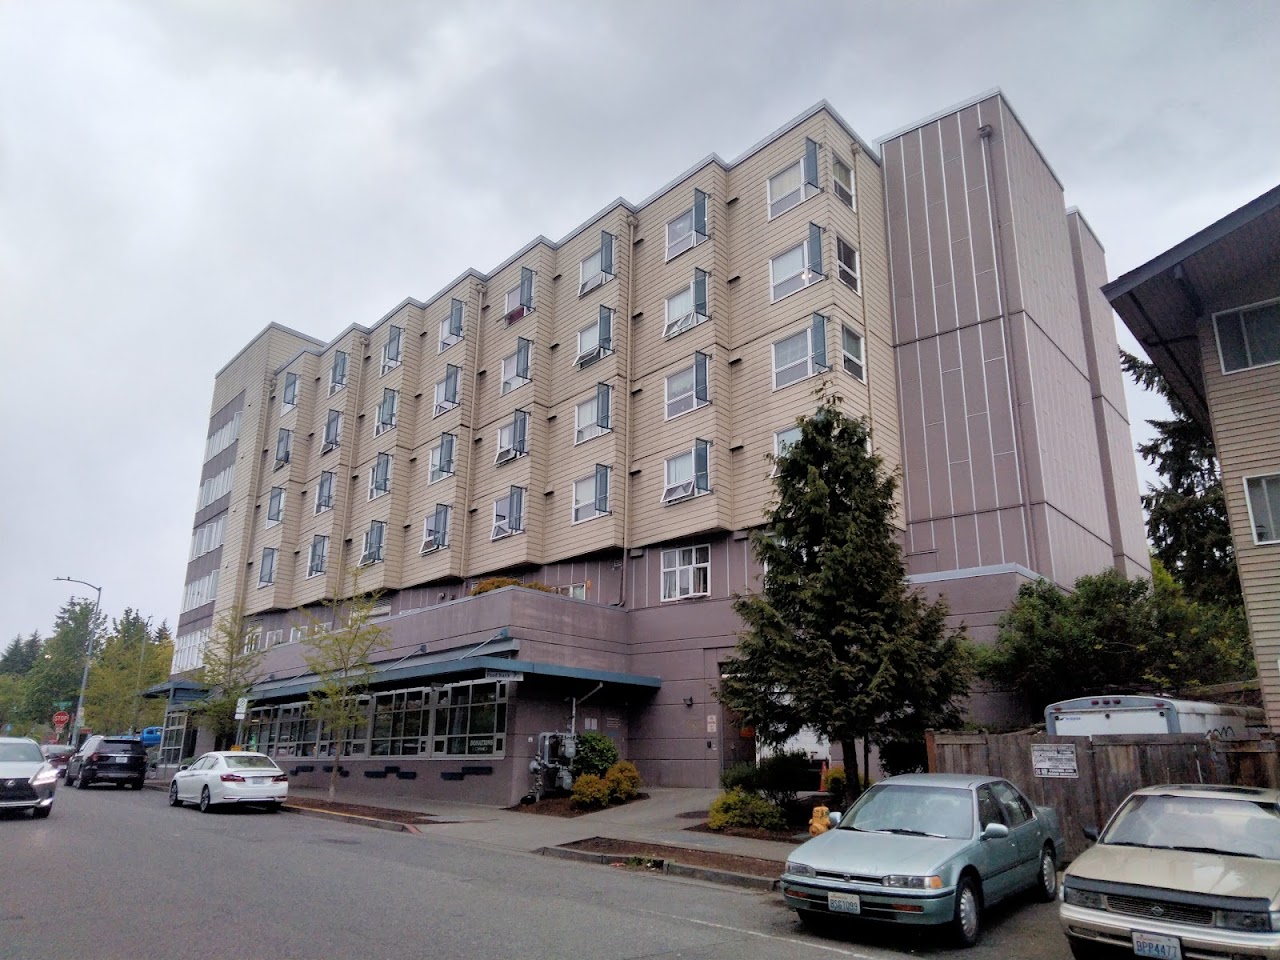 Photo of MCDERMOTT PLACE. Affordable housing located at 12740 33RD AVE NE SEATTLE, WA 98125